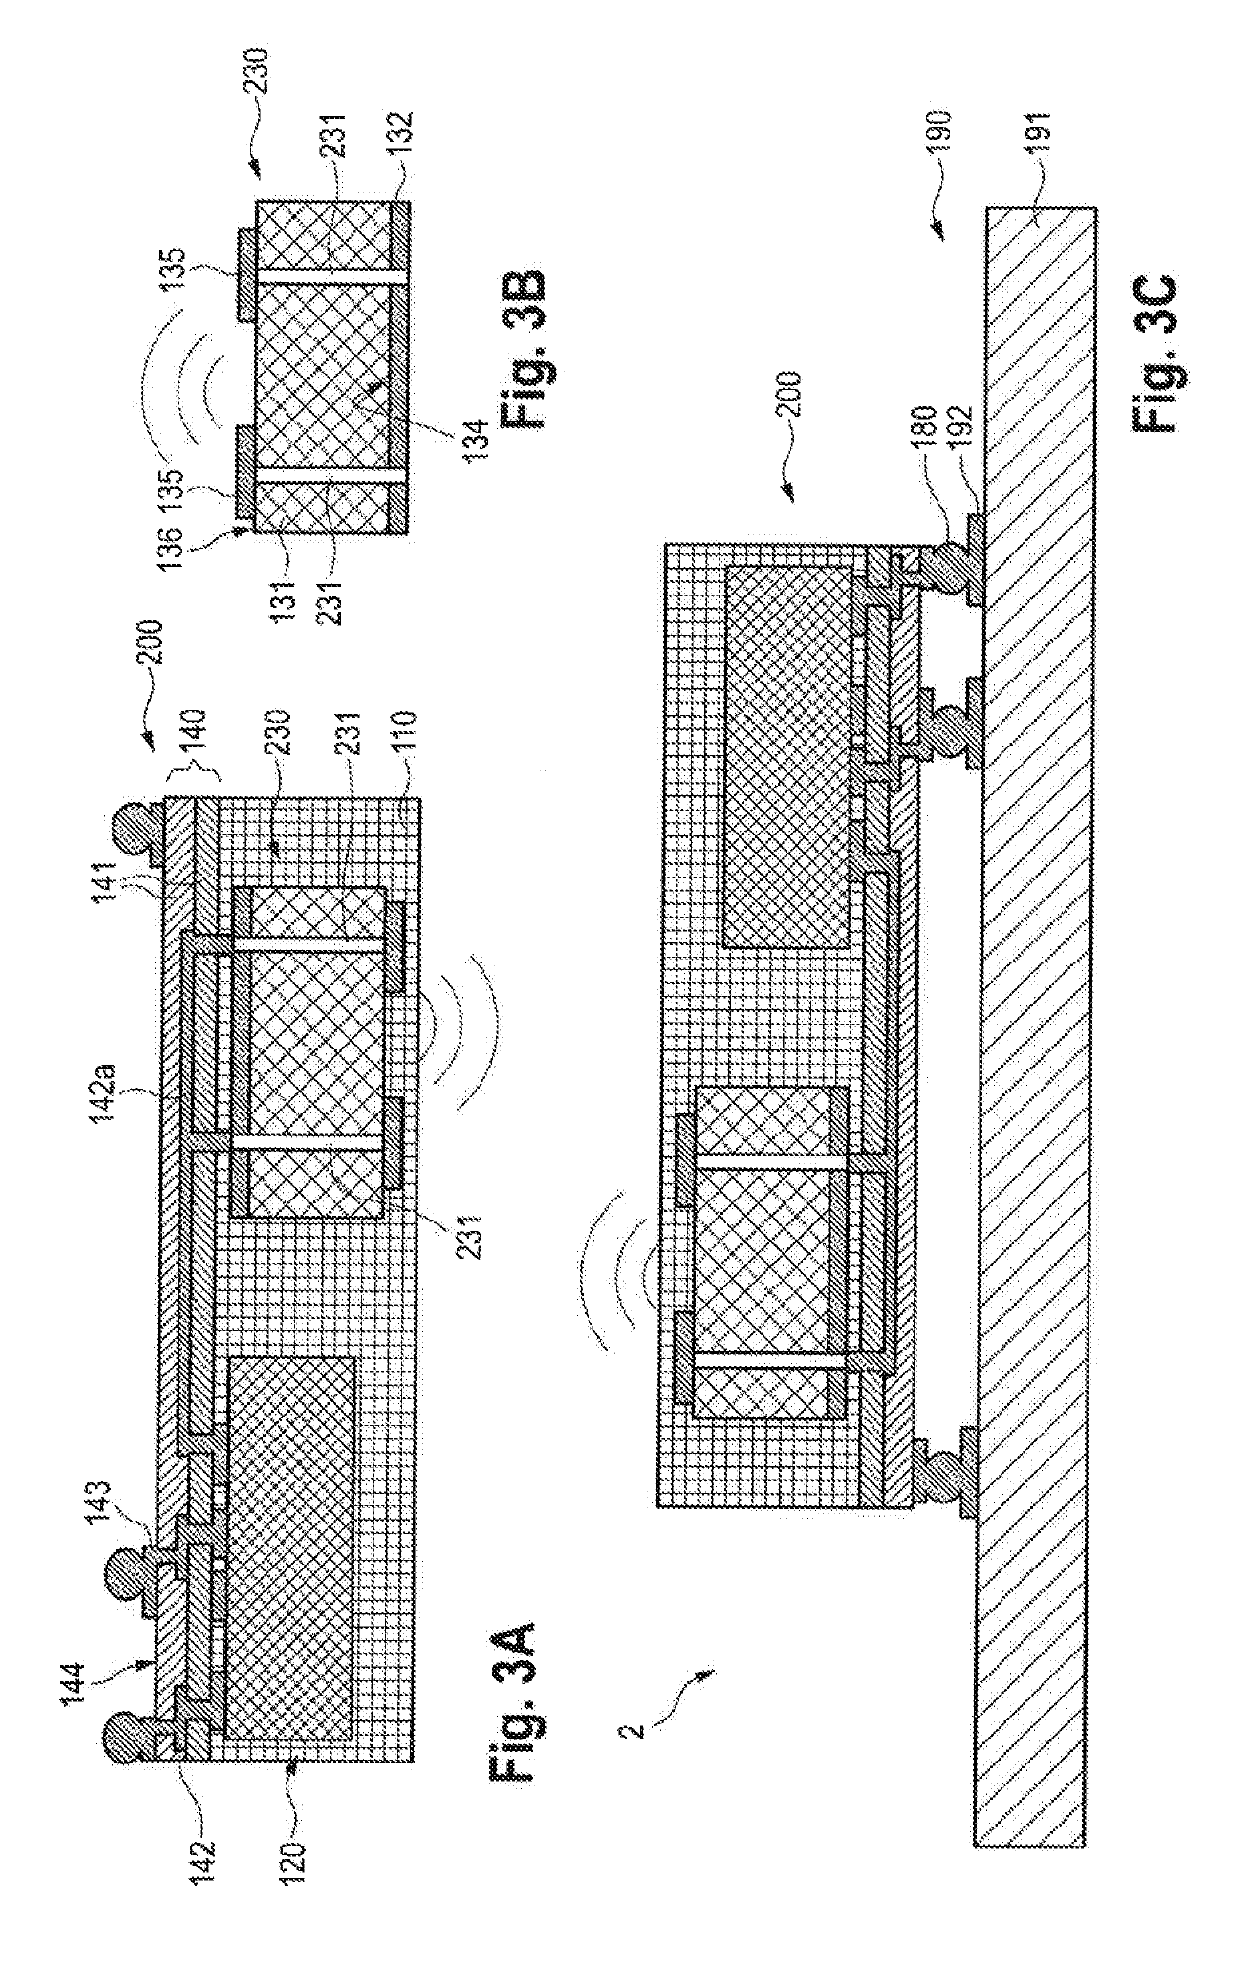 Microwave antenna apparatus, packing and manufacturing method